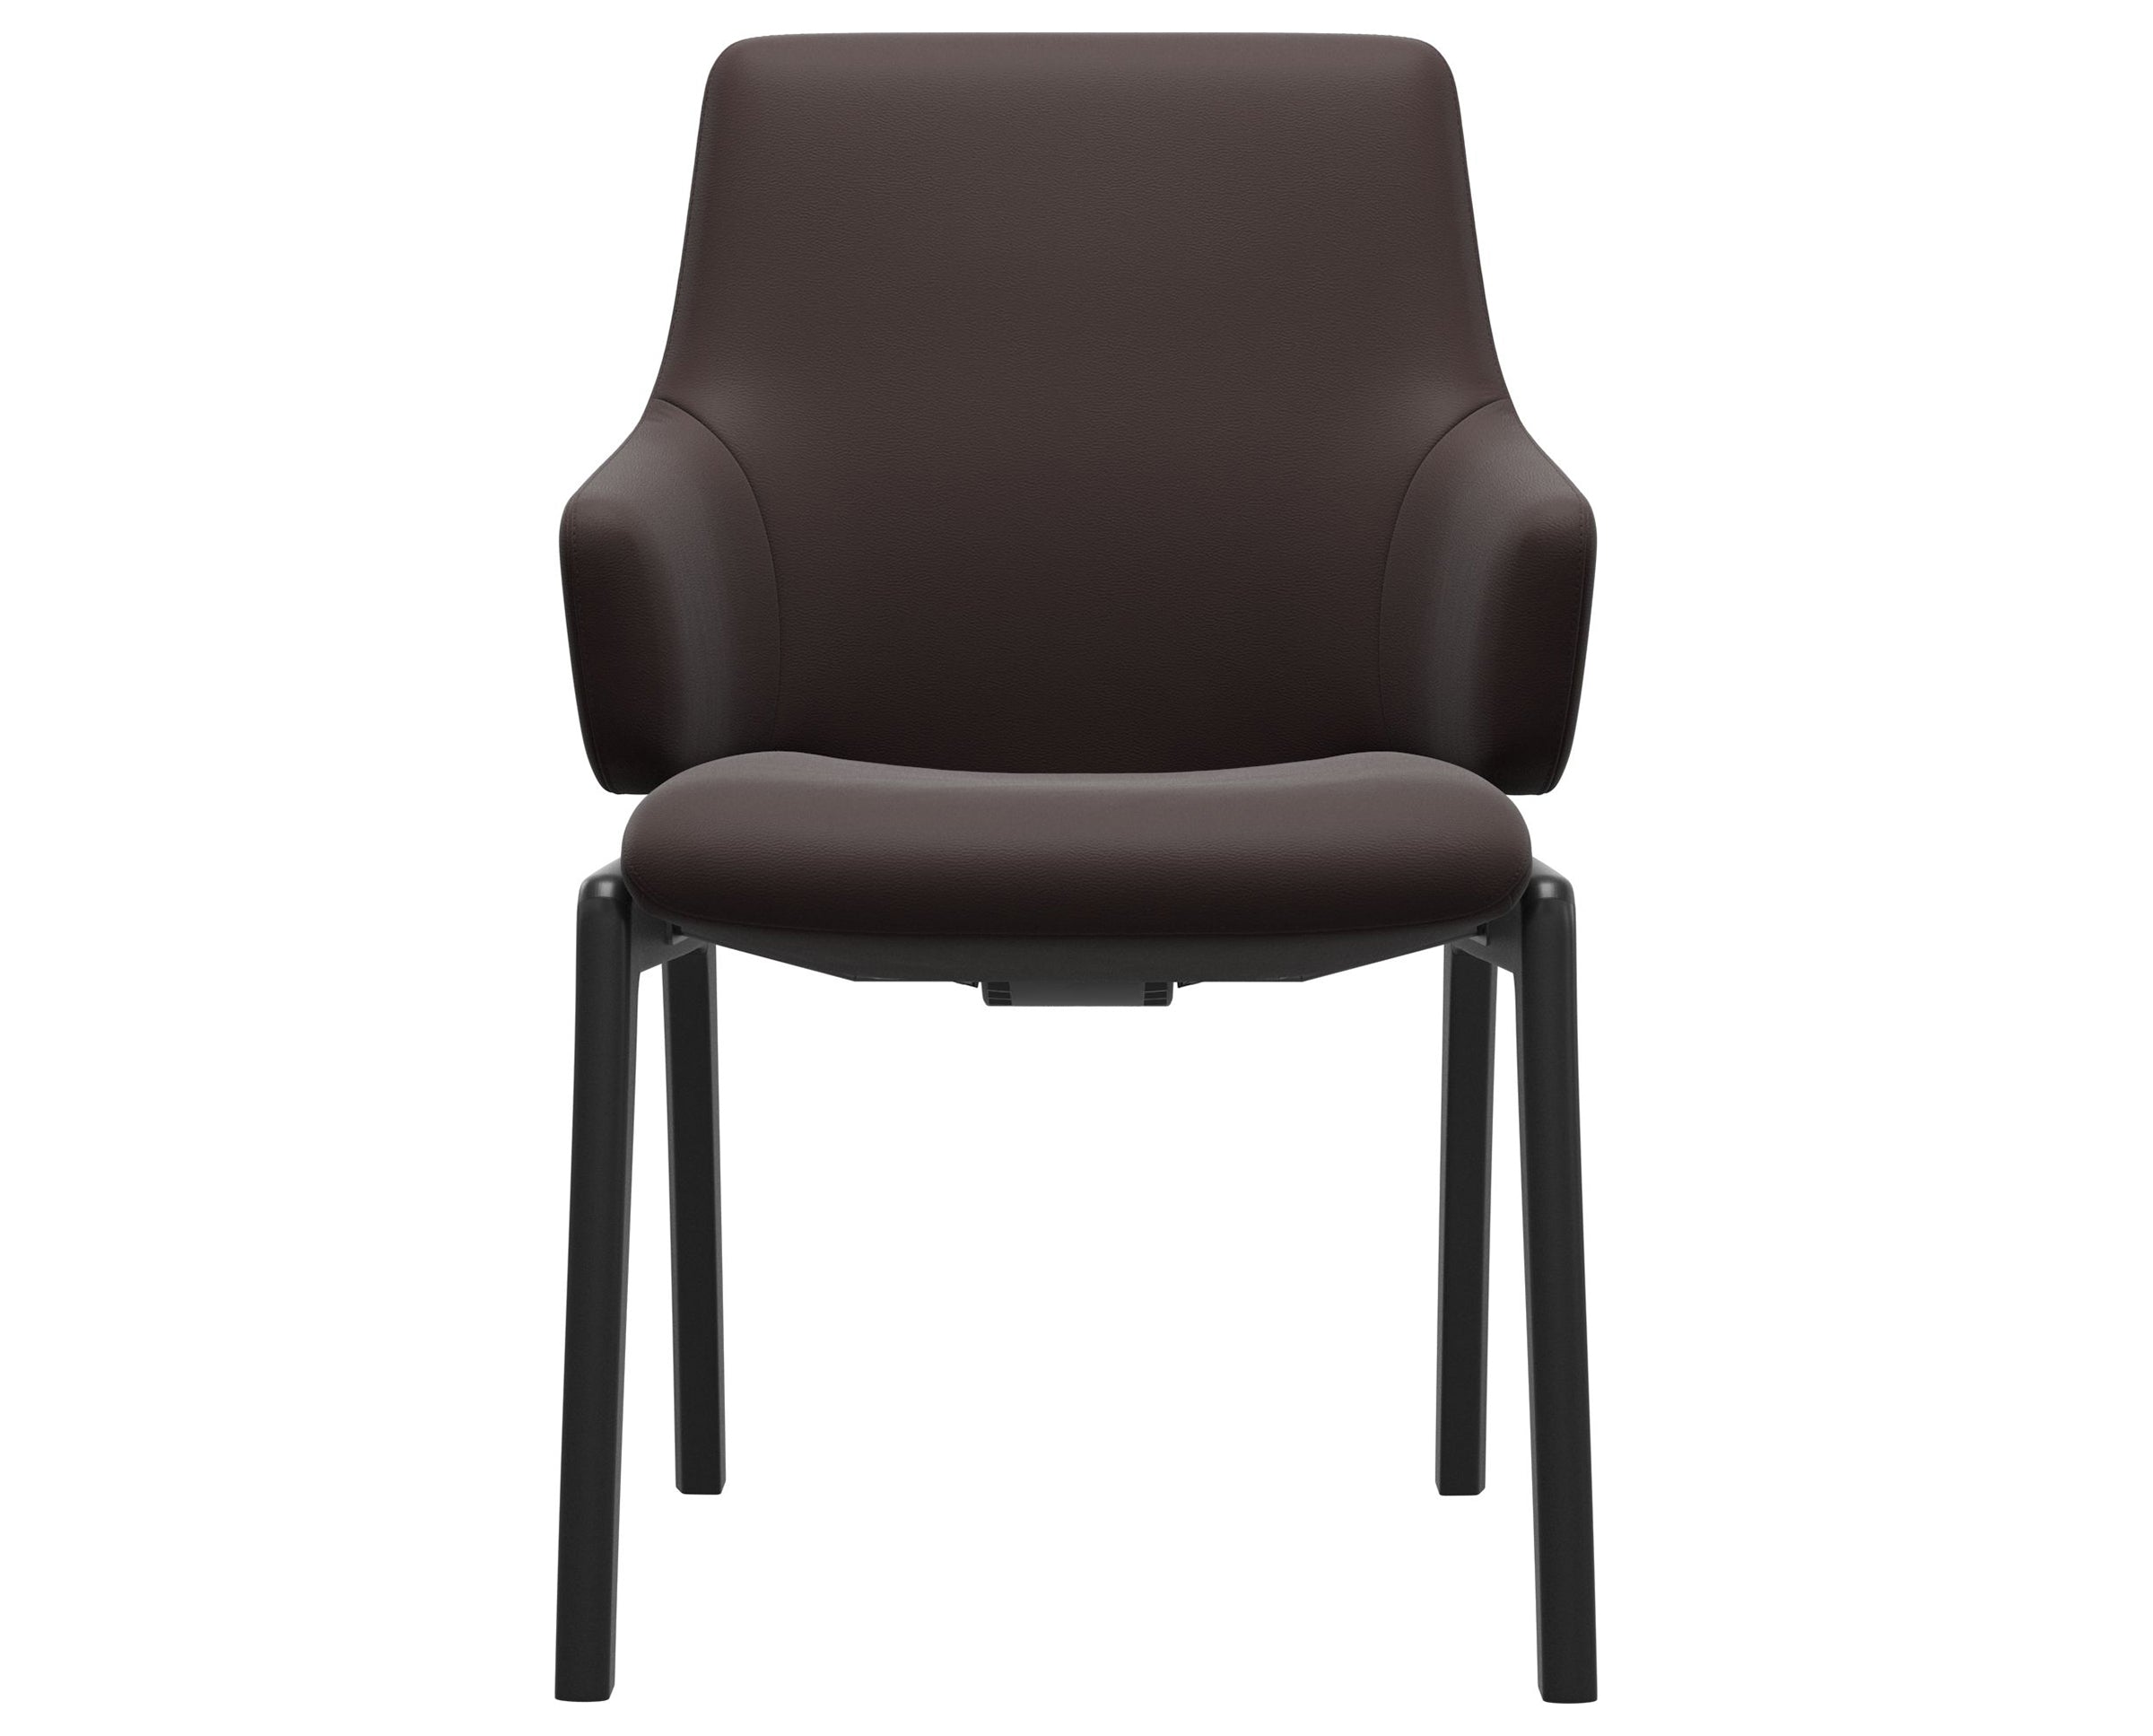 Paloma Leather Chocolate and Black Base | Stressless Laurel Low Back D100 Dining Chair w/Arms | Valley Ridge Furniture